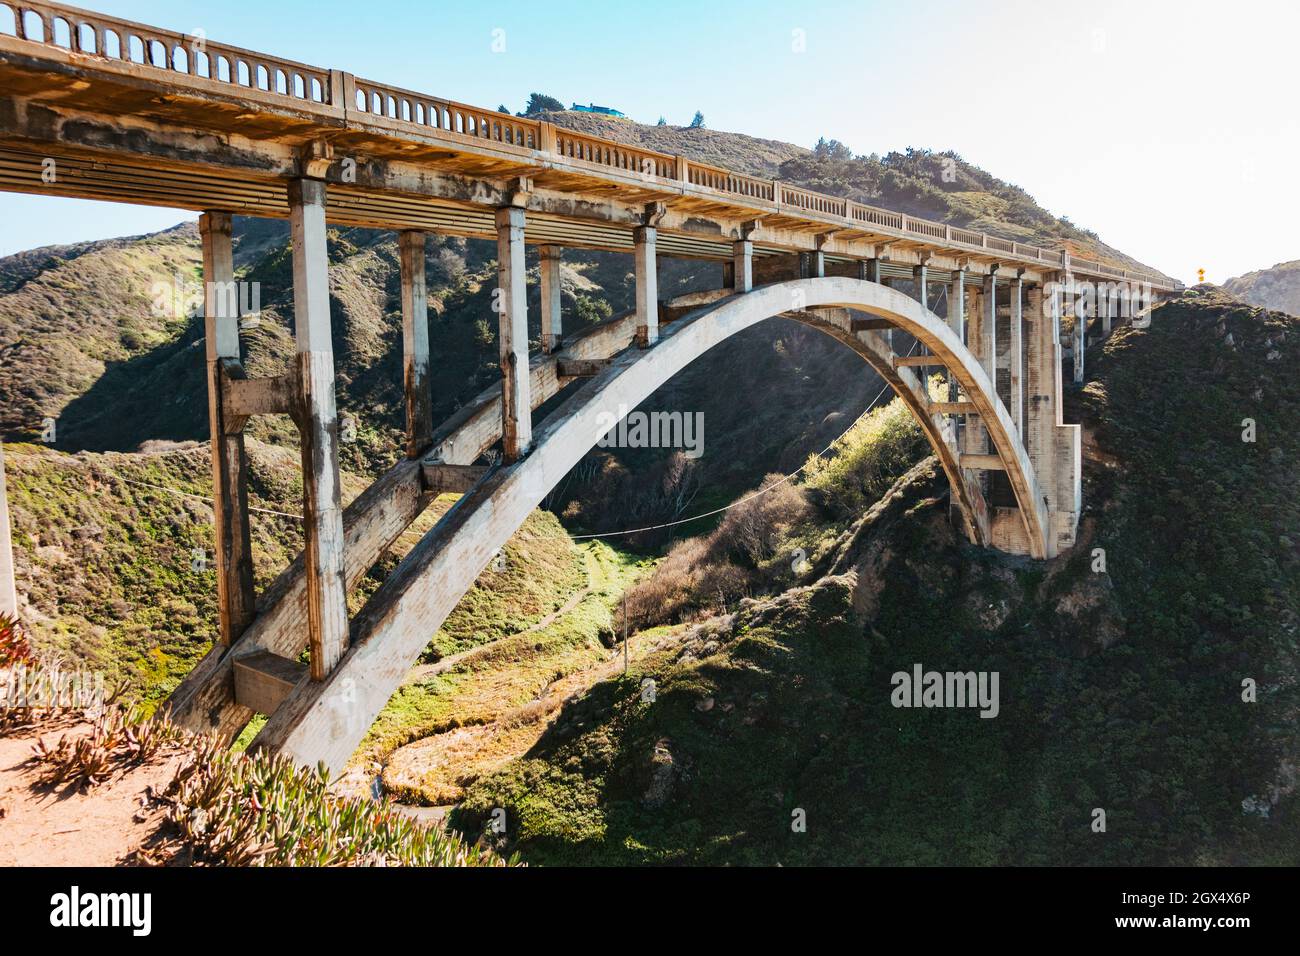 The Rocky Creek Bridge open-spandrel deck arch bridge bridge built 1932 in Big Sur, California, USA to carry State Route 1 highway over the valley Stock Photo